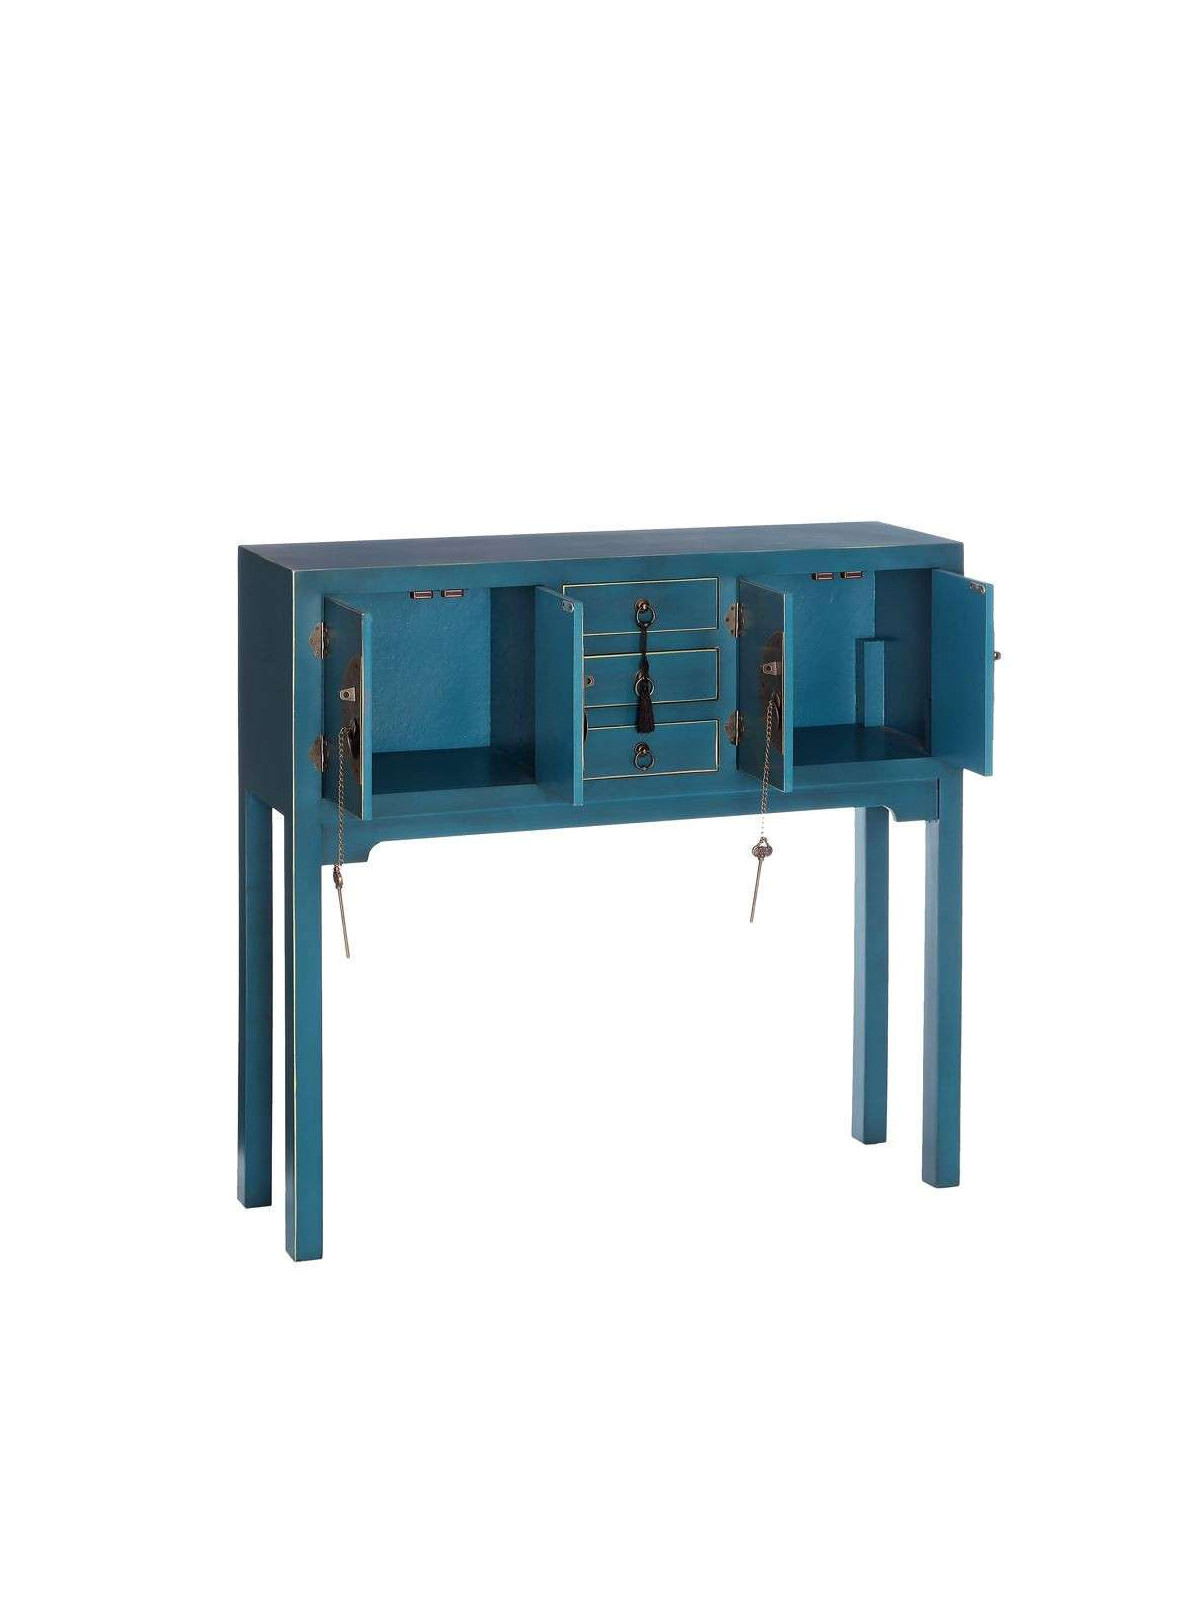 Console chinoise bleue canard 90 cm